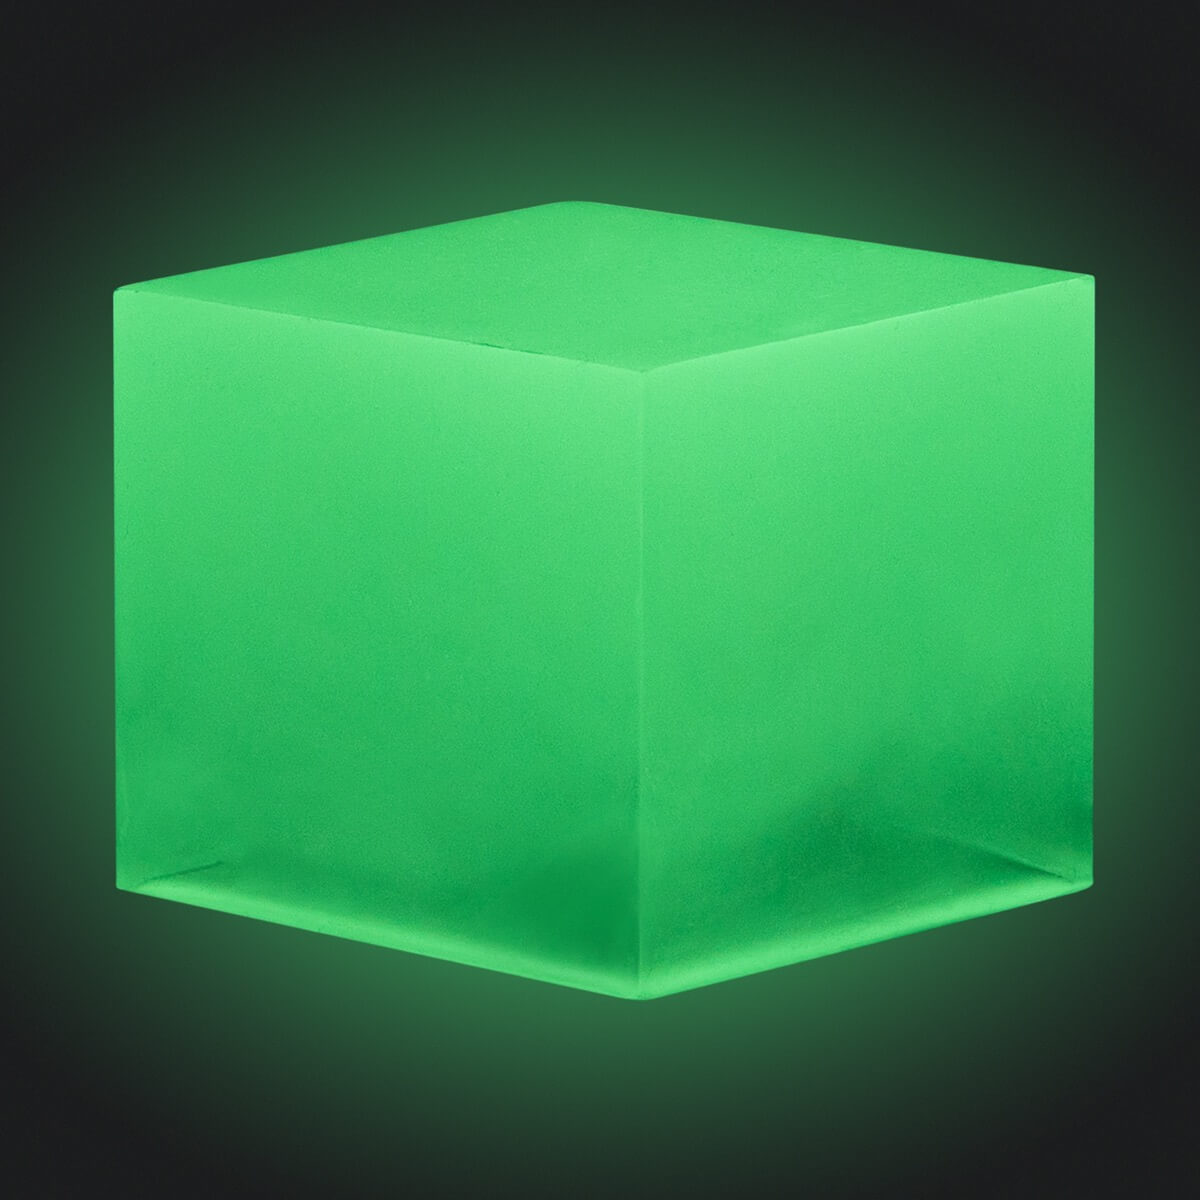 A resin cube made with the Yellow Green Glow in the Dark Mica Powder Pigment by Pigmently, seen in a dark environment to showcase the glow effect.